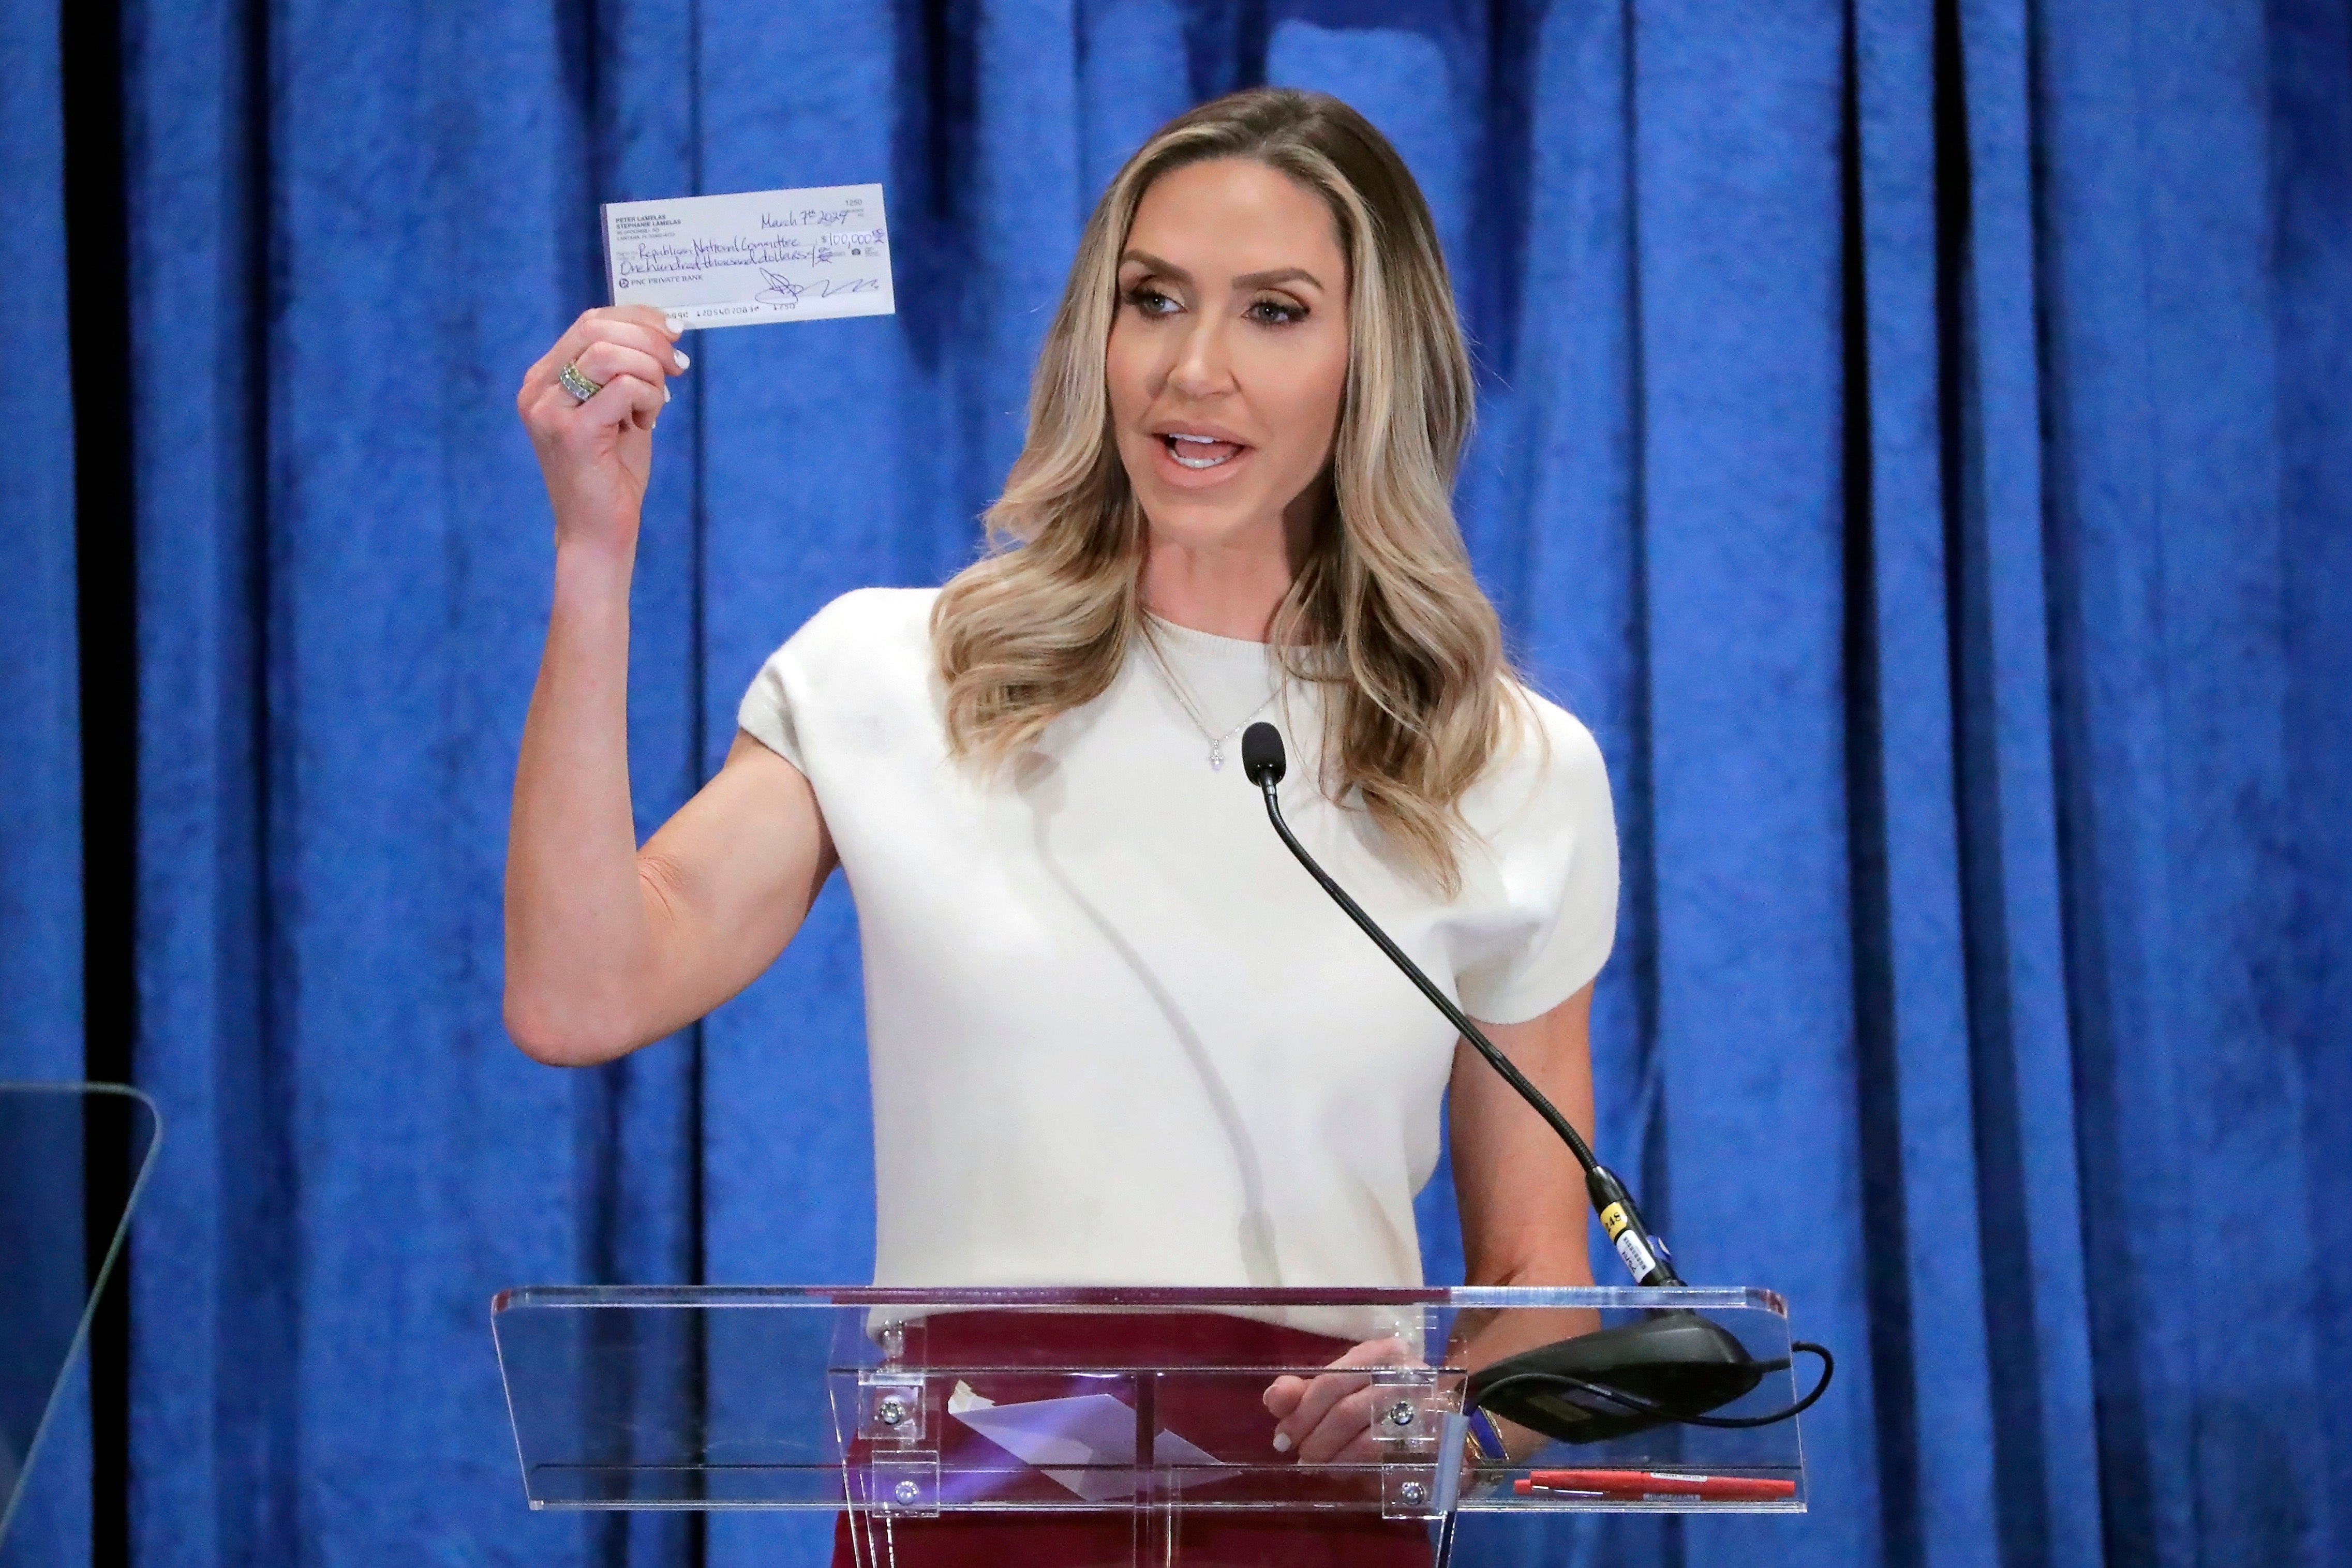 Lara Trump, the newly-elected co-chair of the Republican National Committee, holds up a donation check